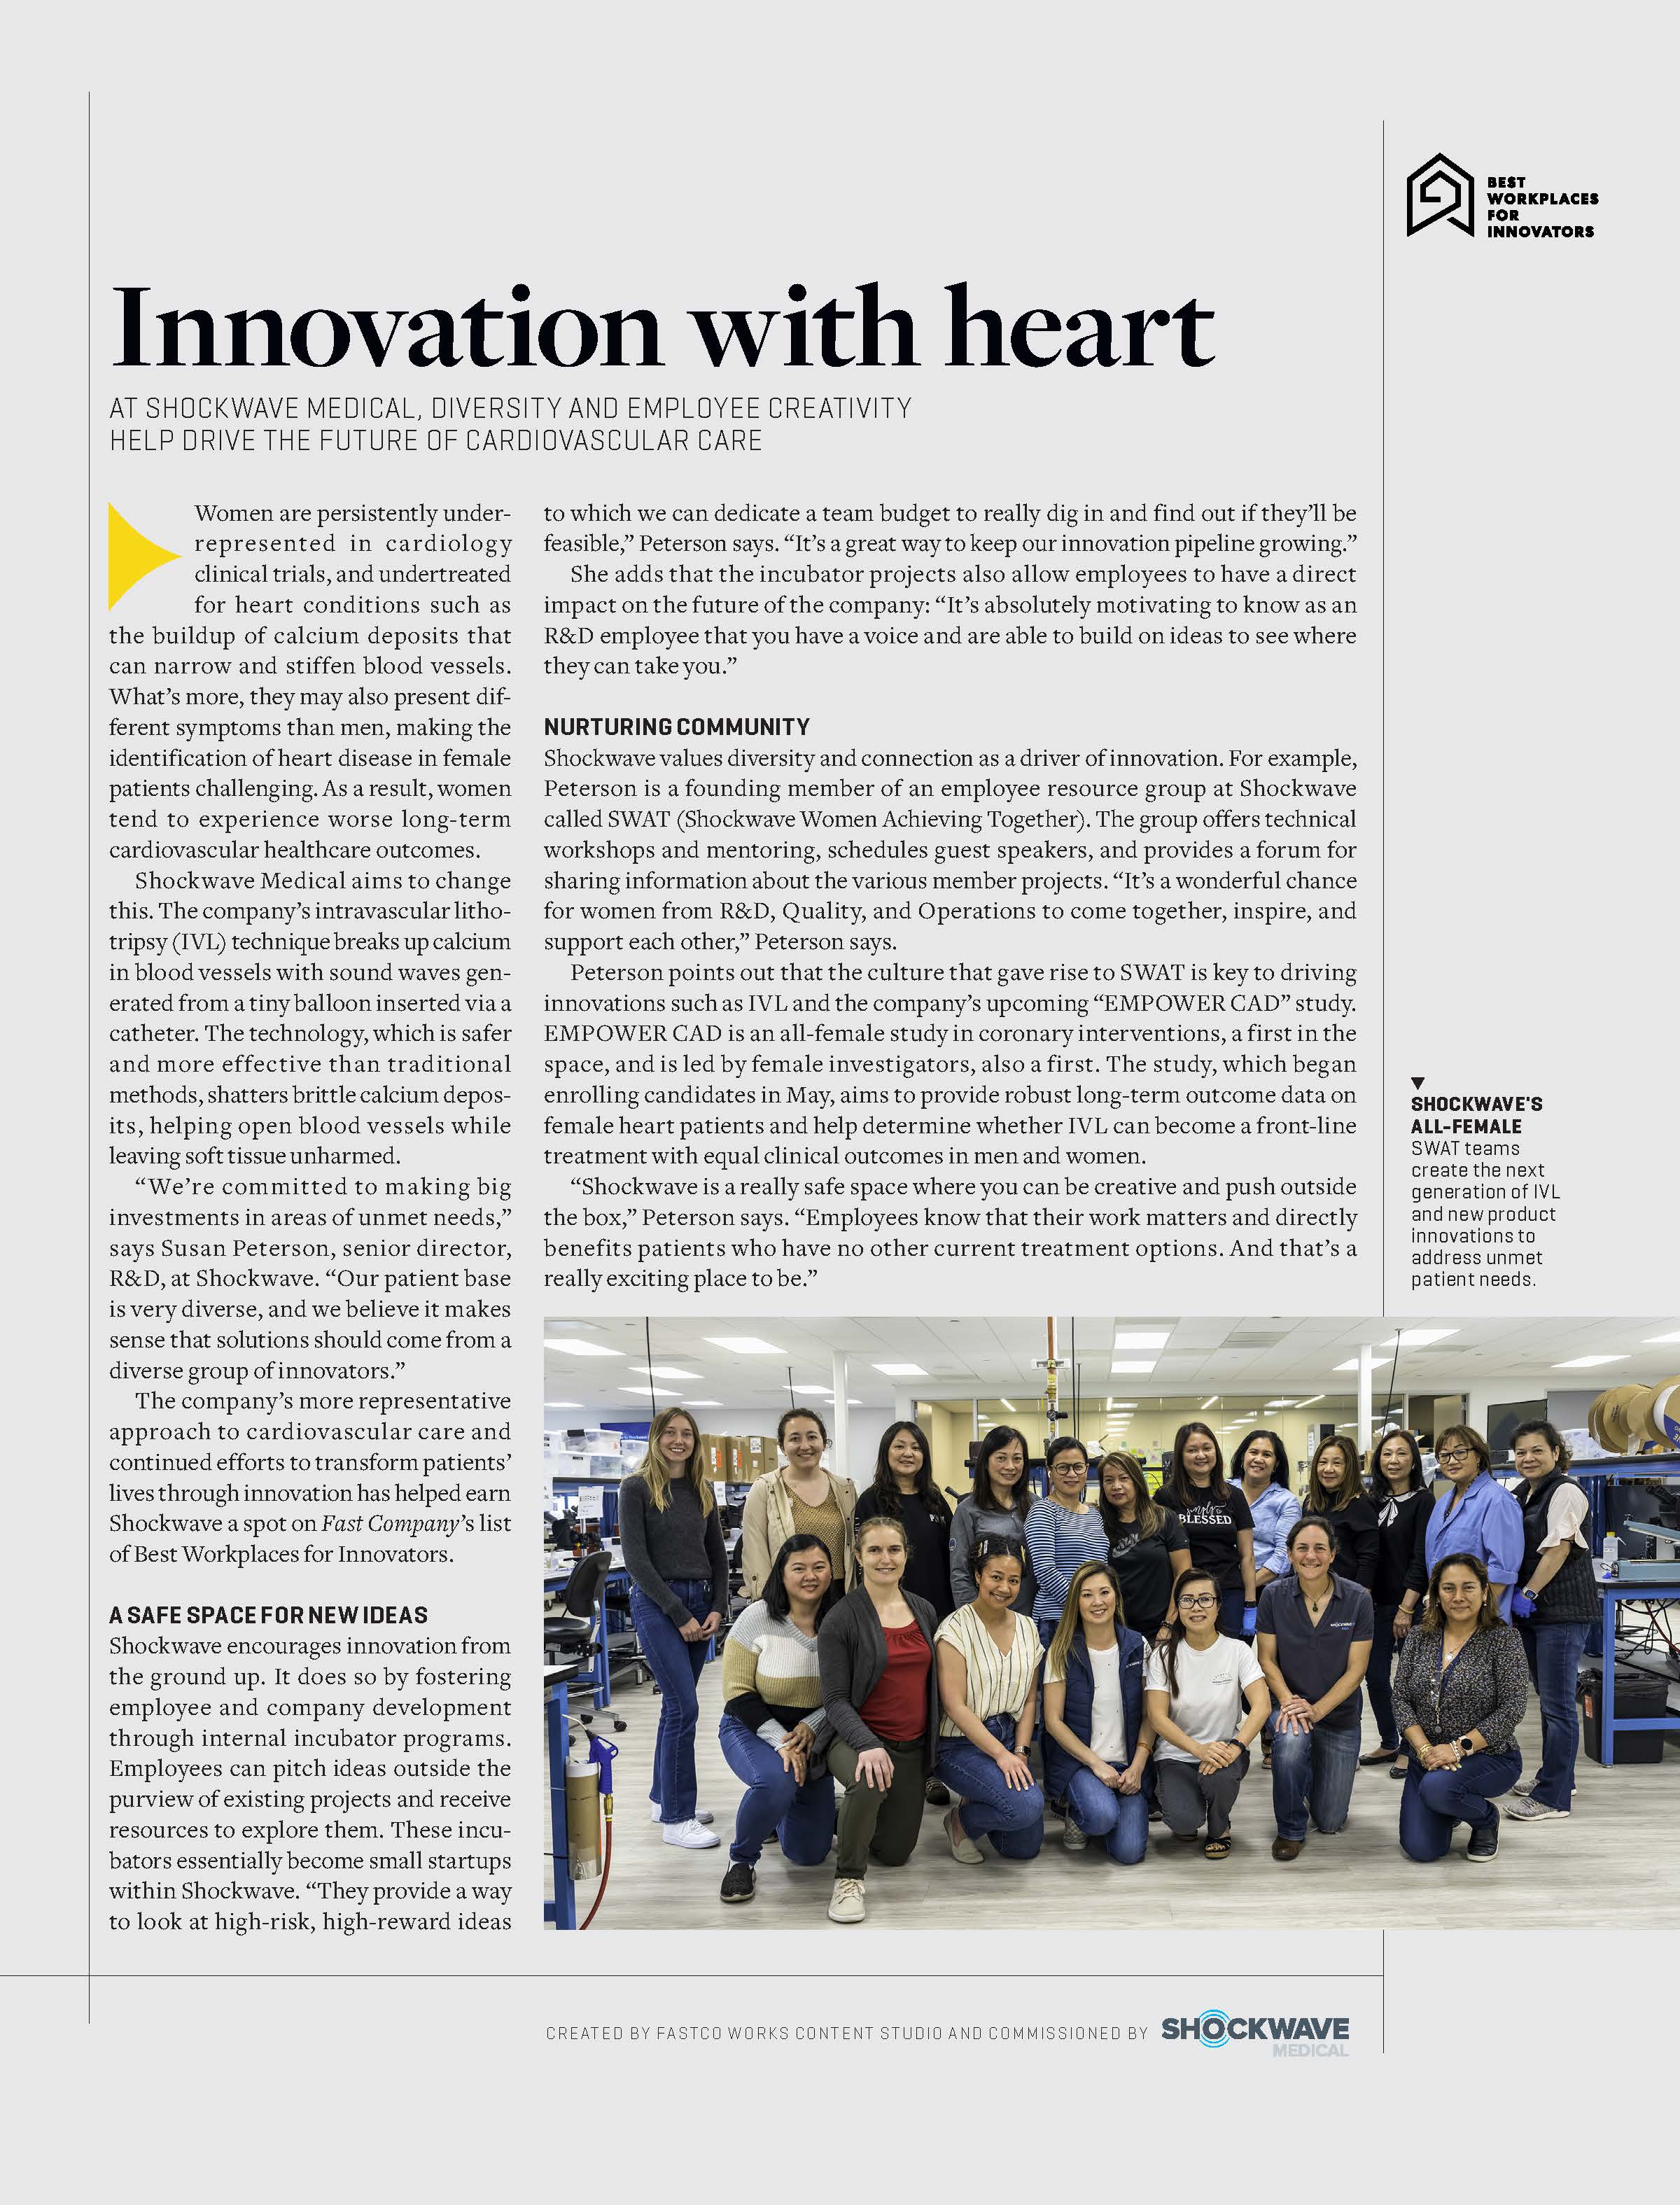 Shockwave 2023 Best Workplaces for Innovators Fast Company Article